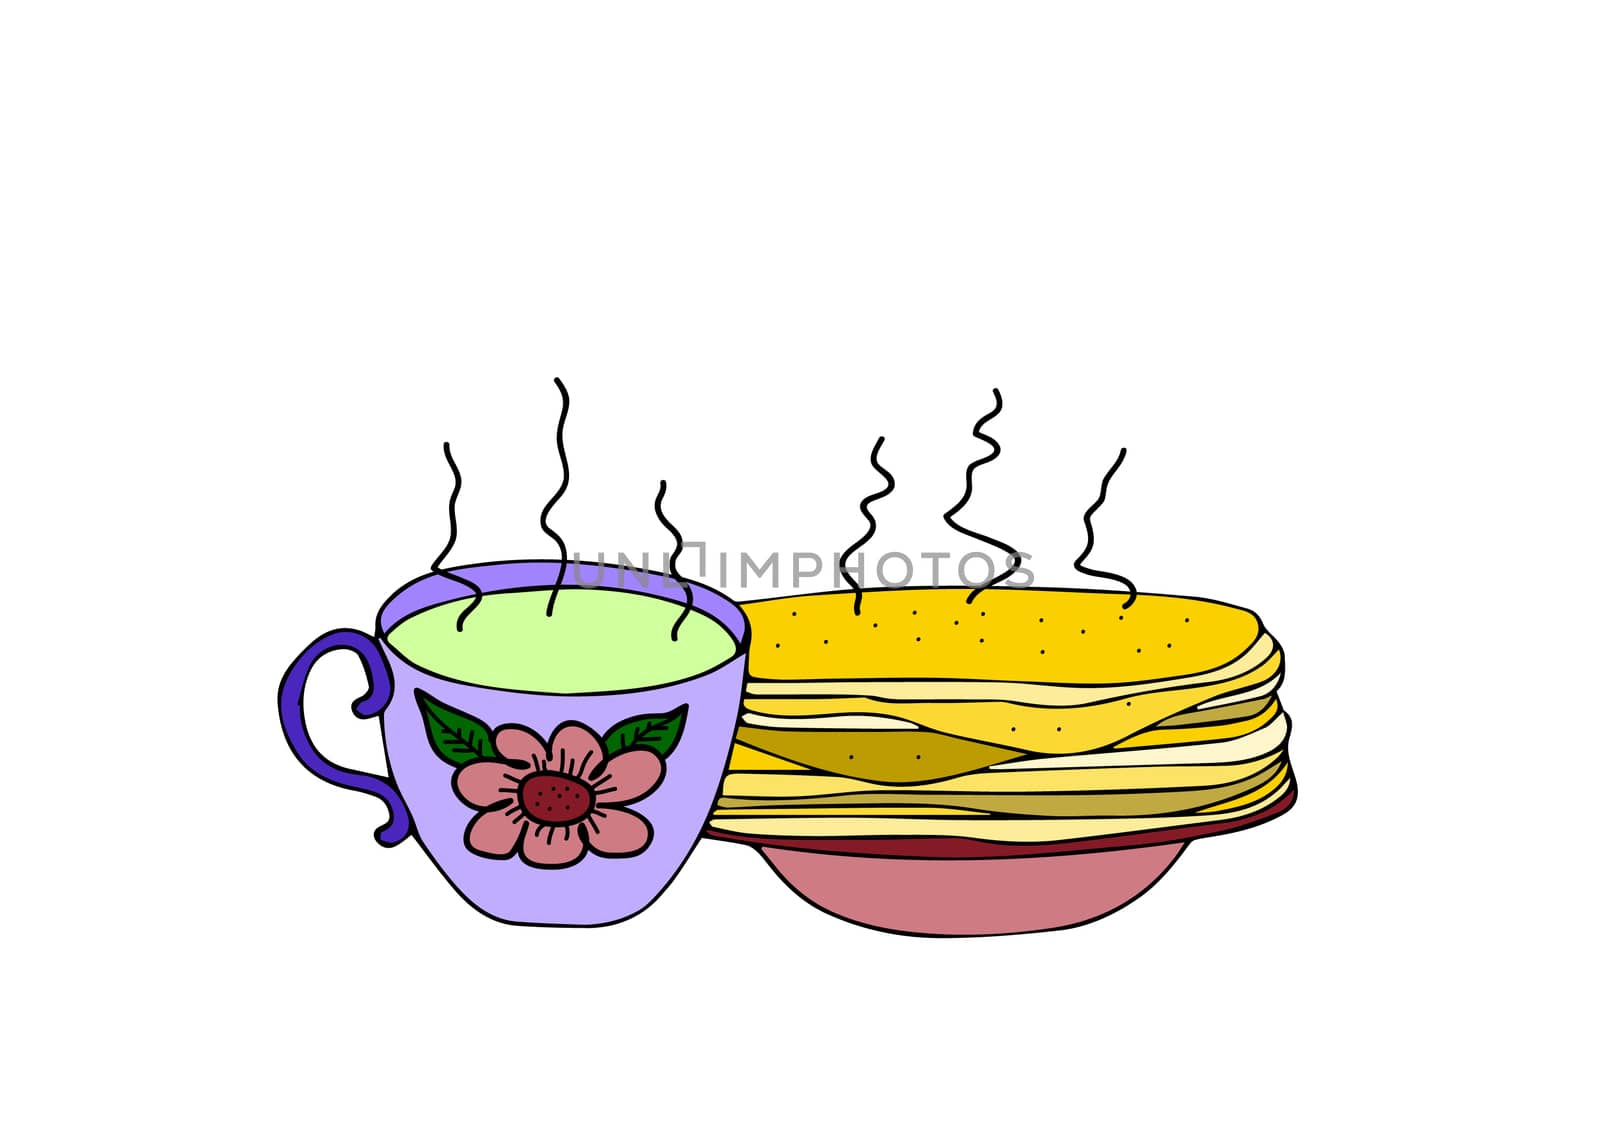 illustration of a cup of tea and pancakes by olga_ovchinnikova